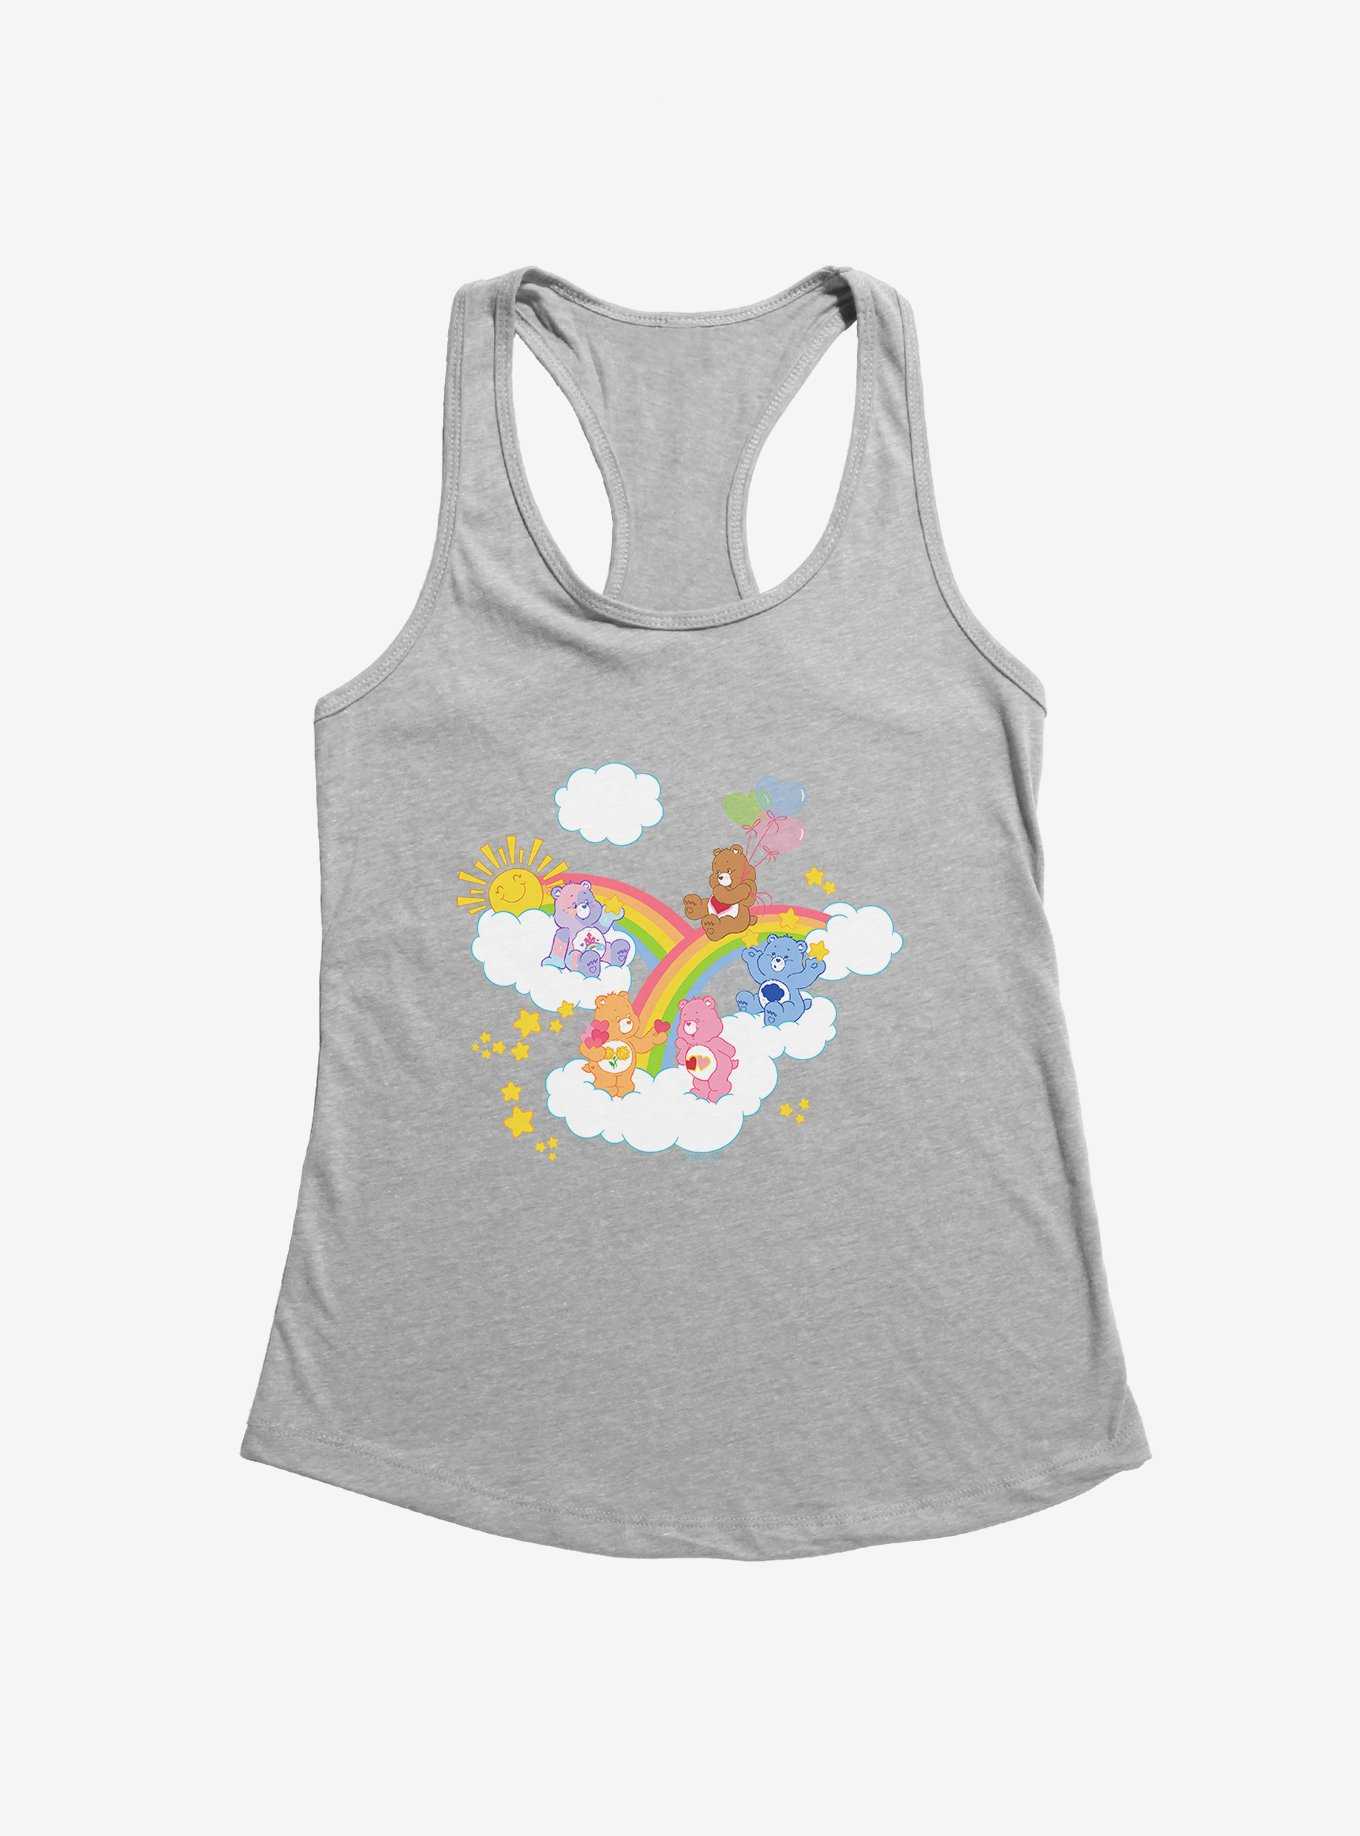 Care Bears Over The Rainbow Girls Tank Top, , hi-res